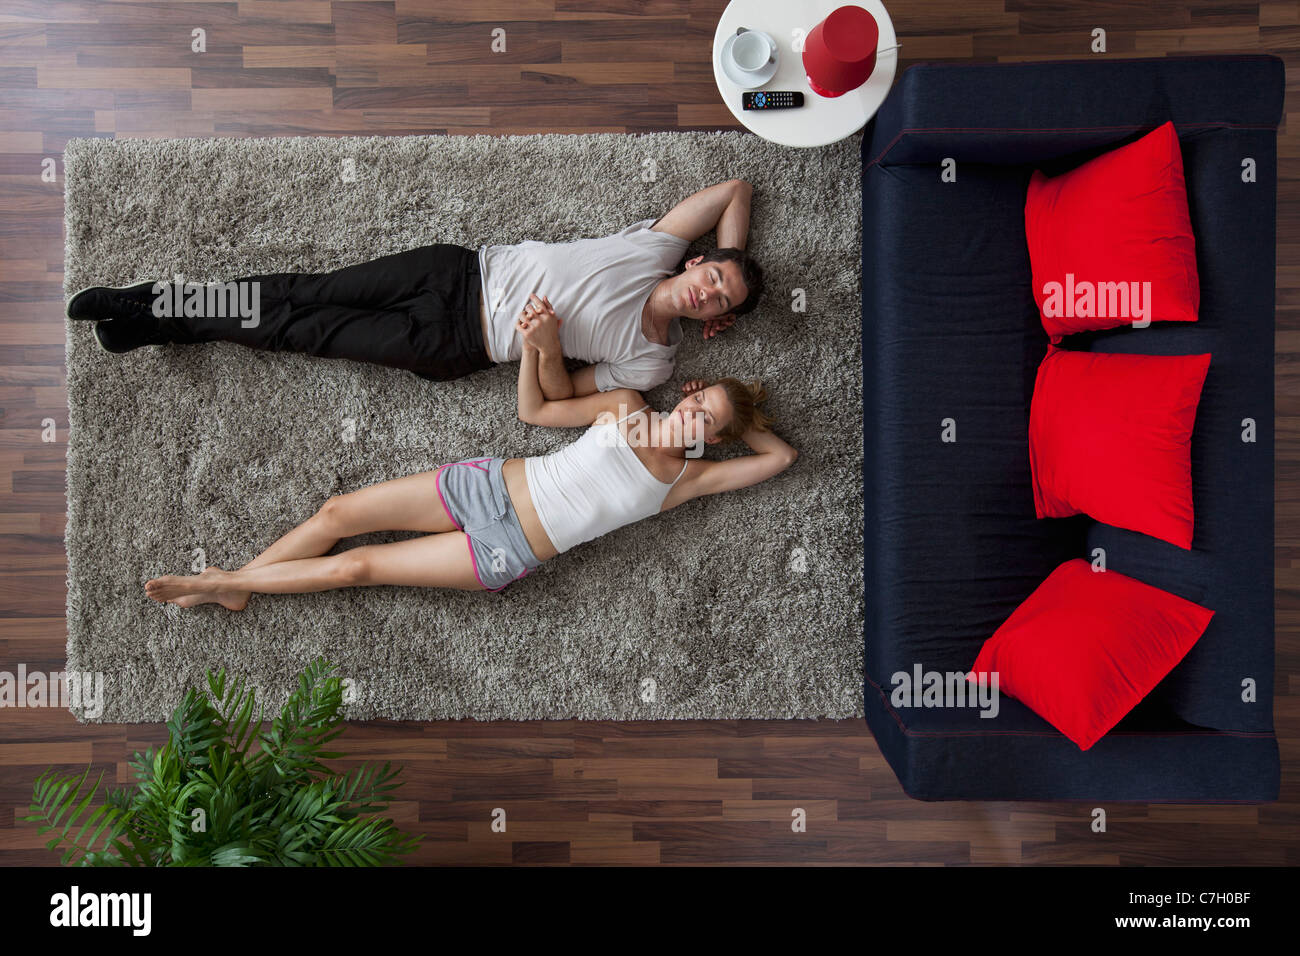 A couple lying on a living room rug, holding hands and sleeping, overhead view Stock Photo